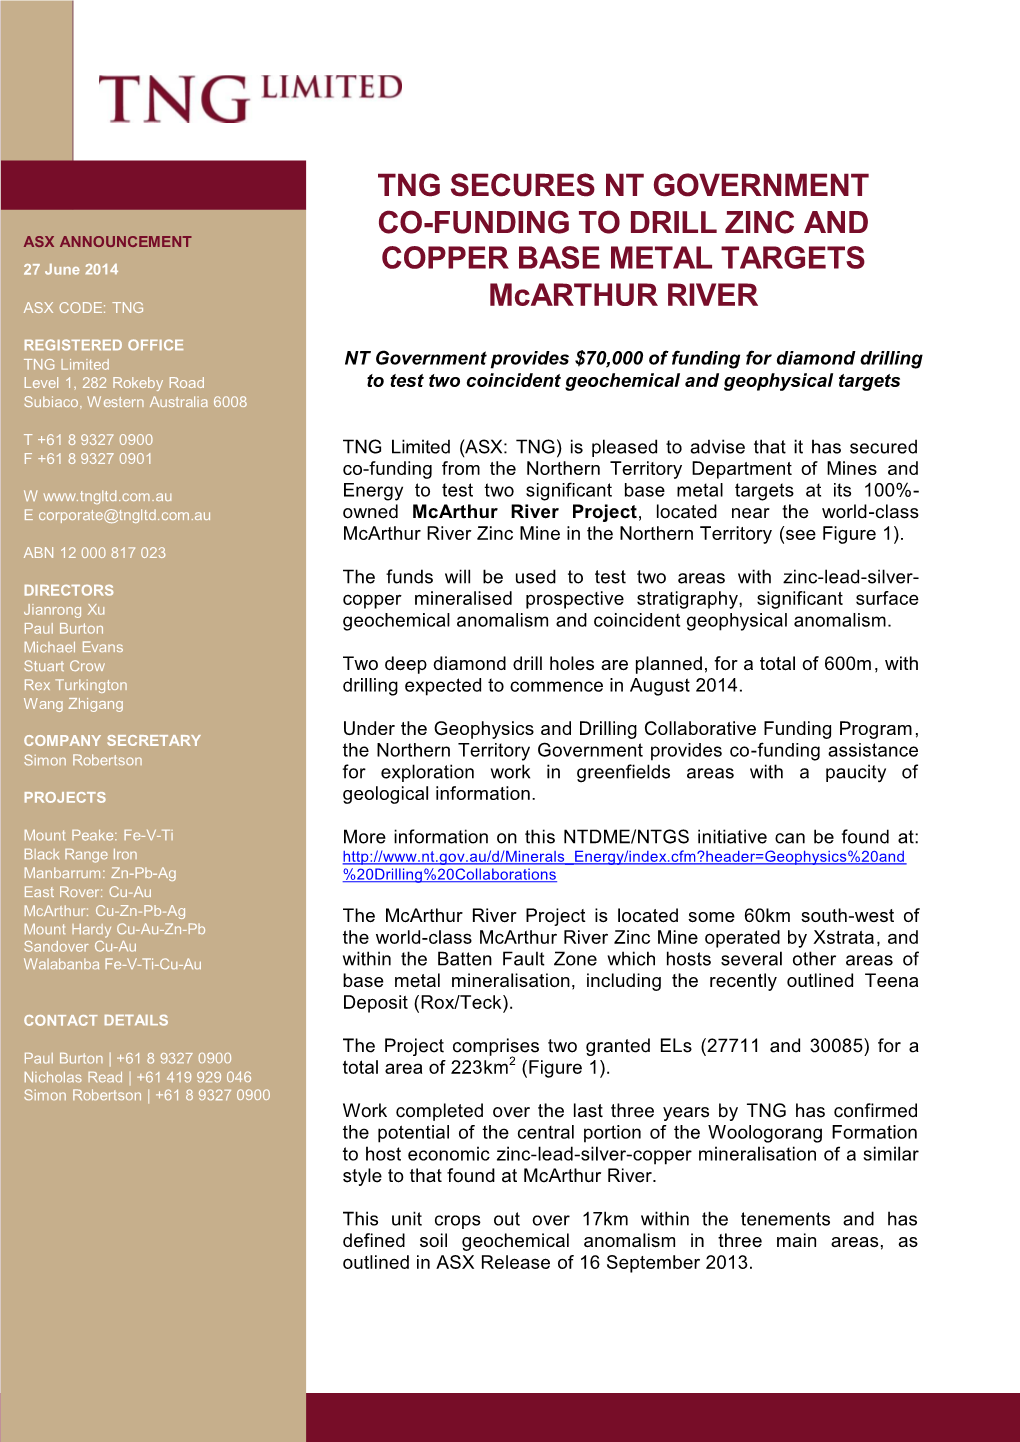 Tng Secures Nt Government Co-Funding to Drill Zinc and Asx